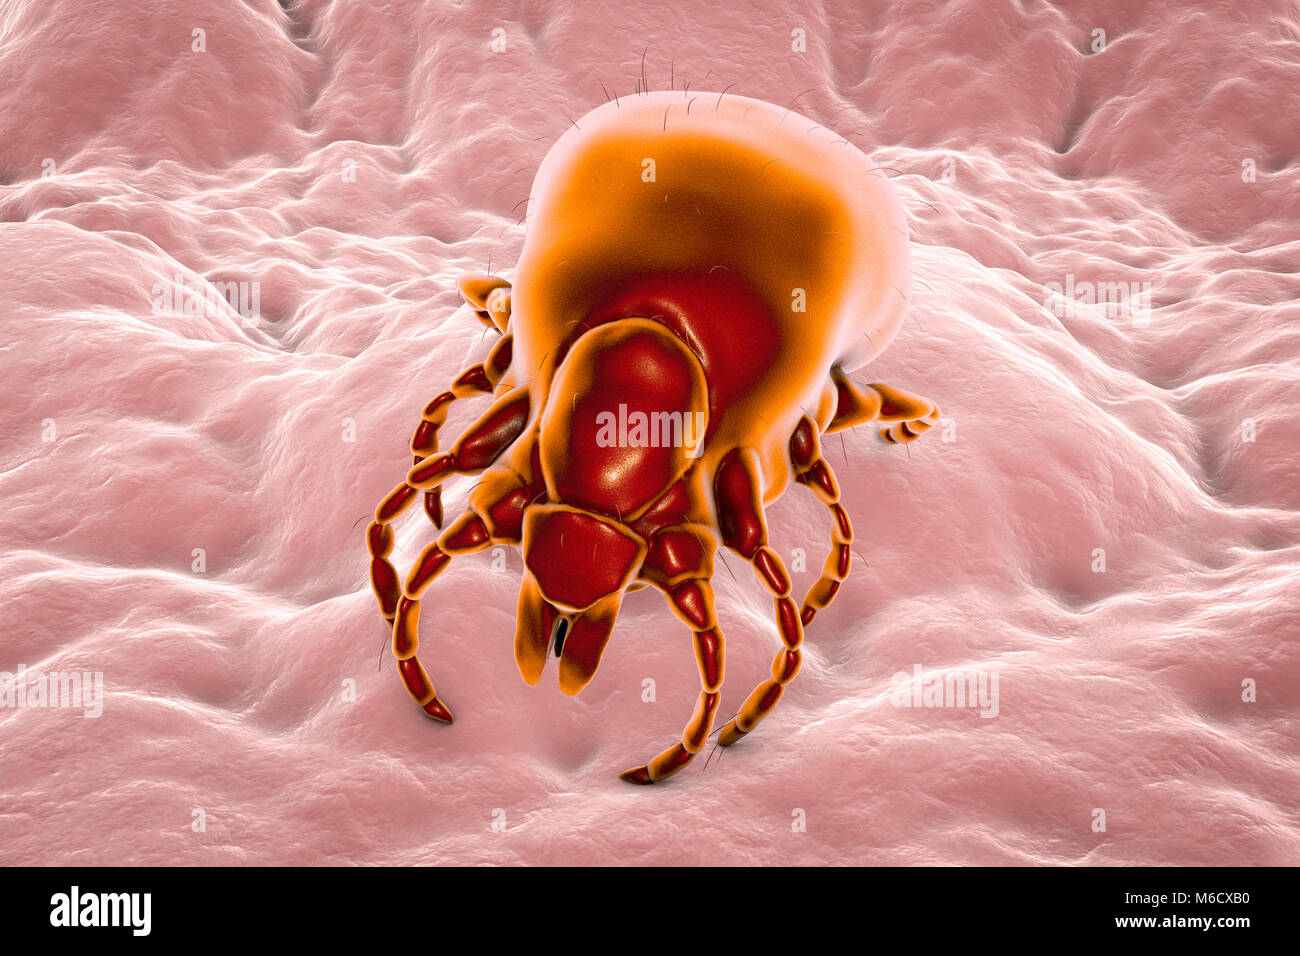 Lyme disease tick.Computer illustration of a female Ixodes ricinus tick,a blood-sucking parasite of humans and the principal vector of Lyme disease in Europe.This tick uses specialised mouthparts to pierce the host's skin and hold fast for several days while it swells with blood,increasing in weight by up to 200 times.The female feeds only three times during her life and can survive for years between meals,spending most of the time hidden in vegetation.Mating takes place just before her final meal,after which she drops to the ground and lays thousands of eggs. Stock Photo